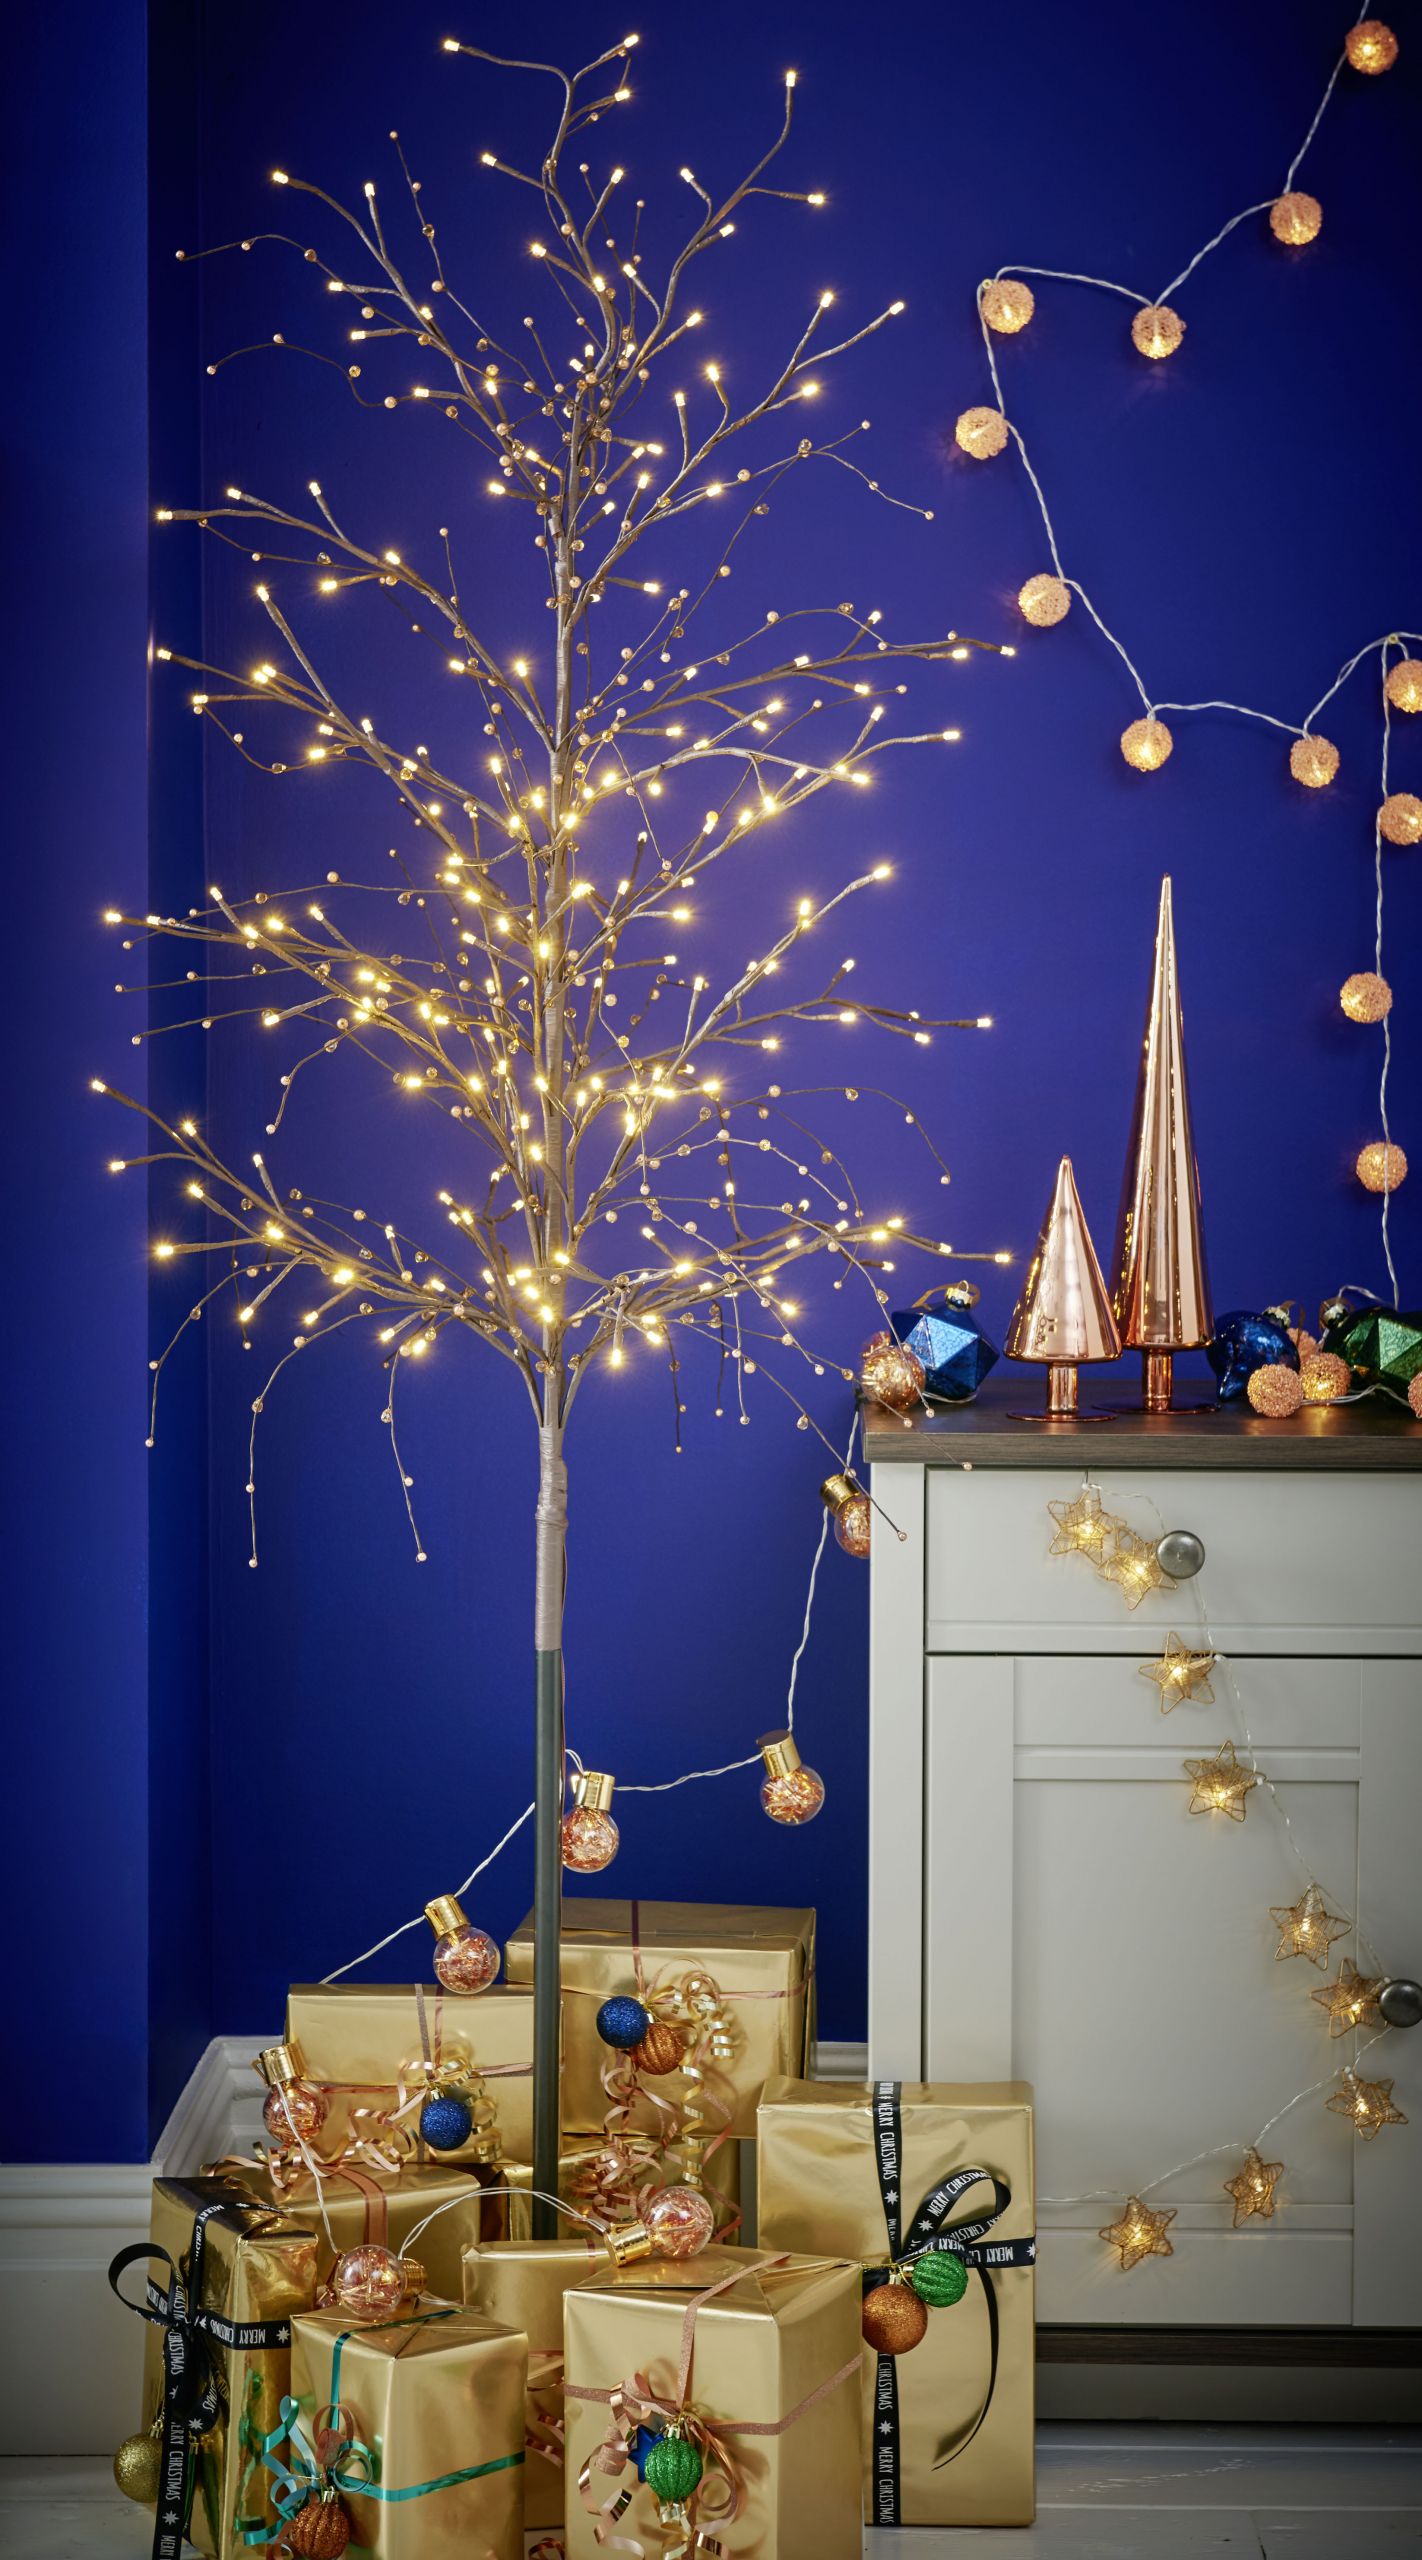 Christmas Light Ideas Indoor
 How To Choose The Best Indoor Christmas Lights